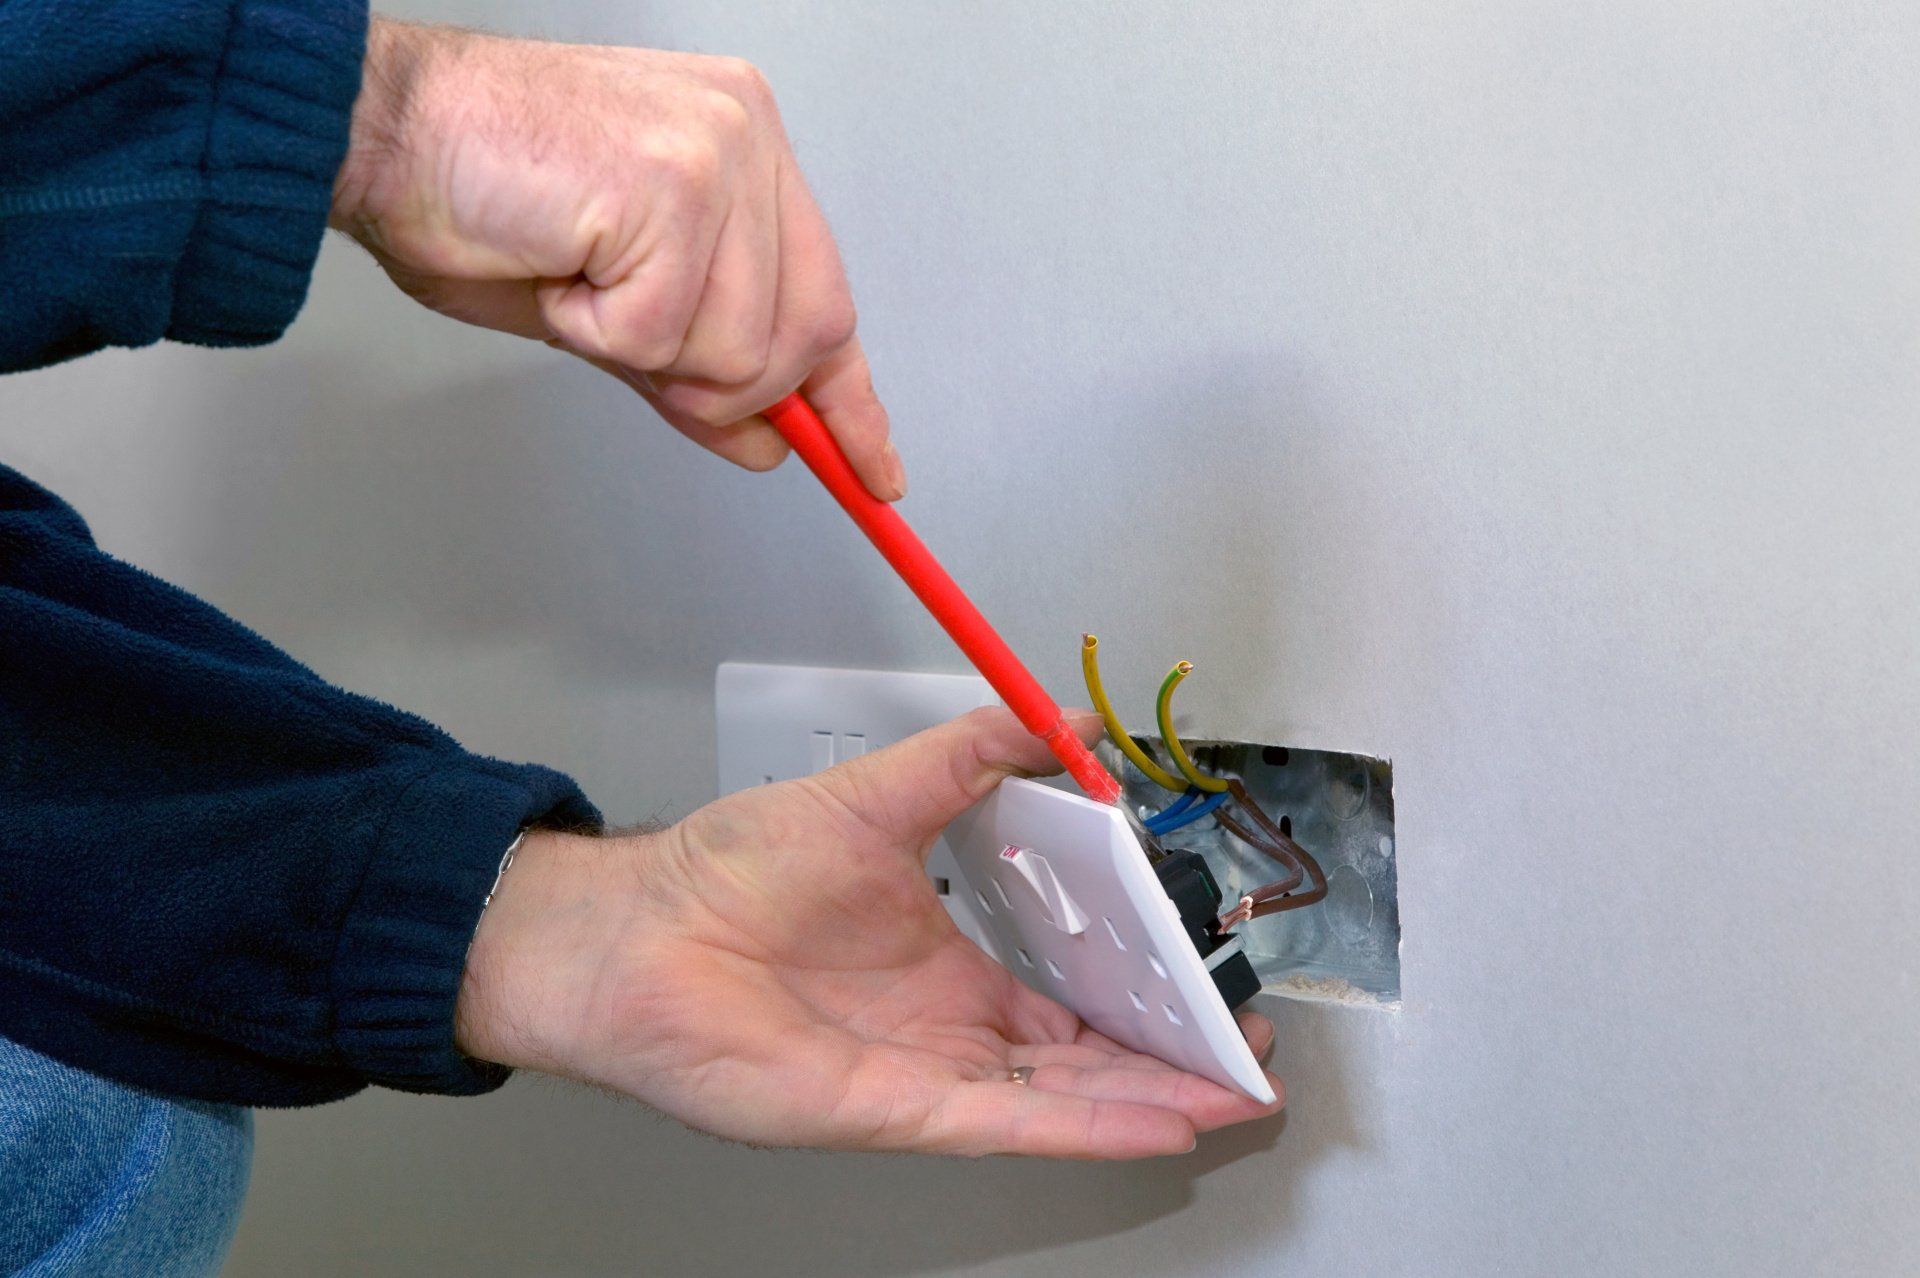 An electrician's hands carefully installing a power socket with focused precision.